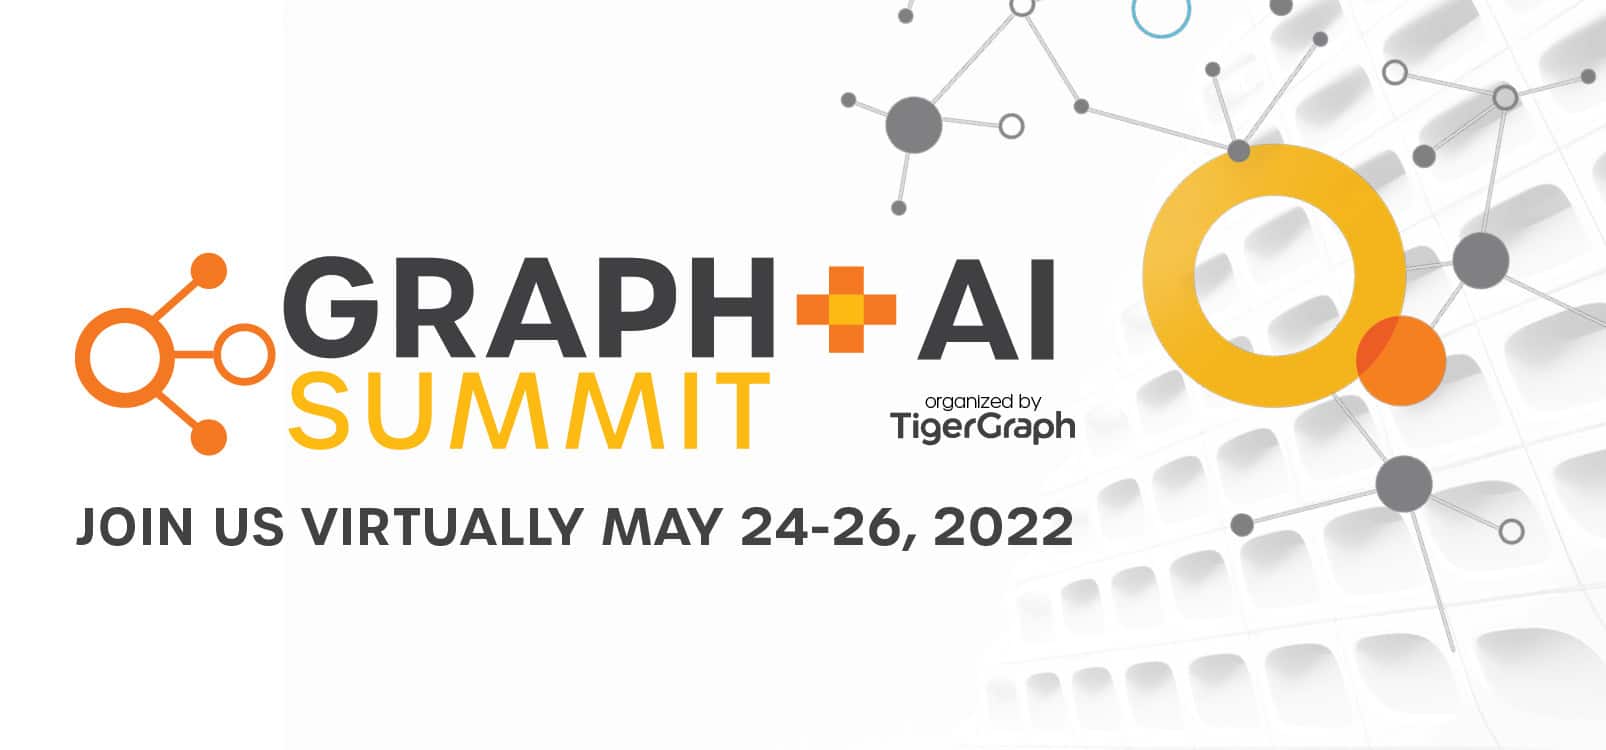 Graph + AI Summit - Getting the Most from Your Virtual Summit Experience